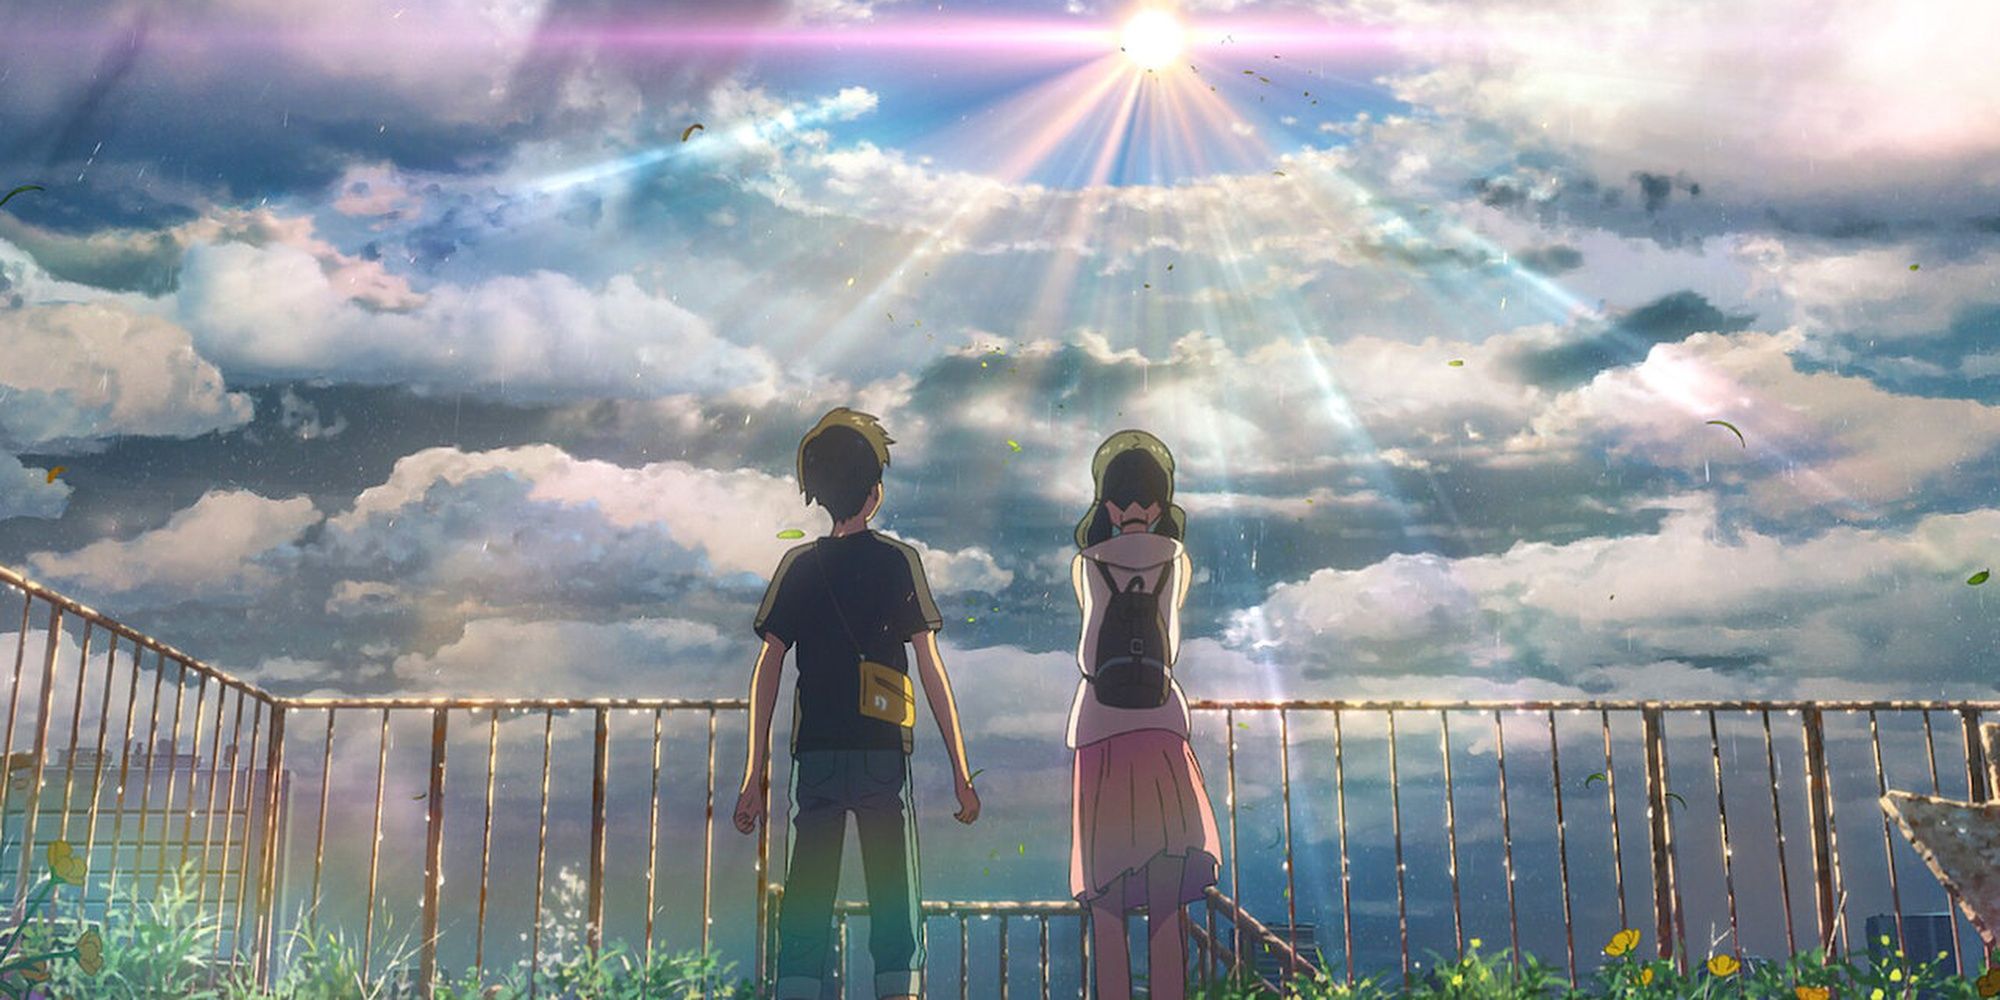 Hodaka and Hina from Weathering with You looking at a beautiful rainbow light coming out of the clouds in the sky